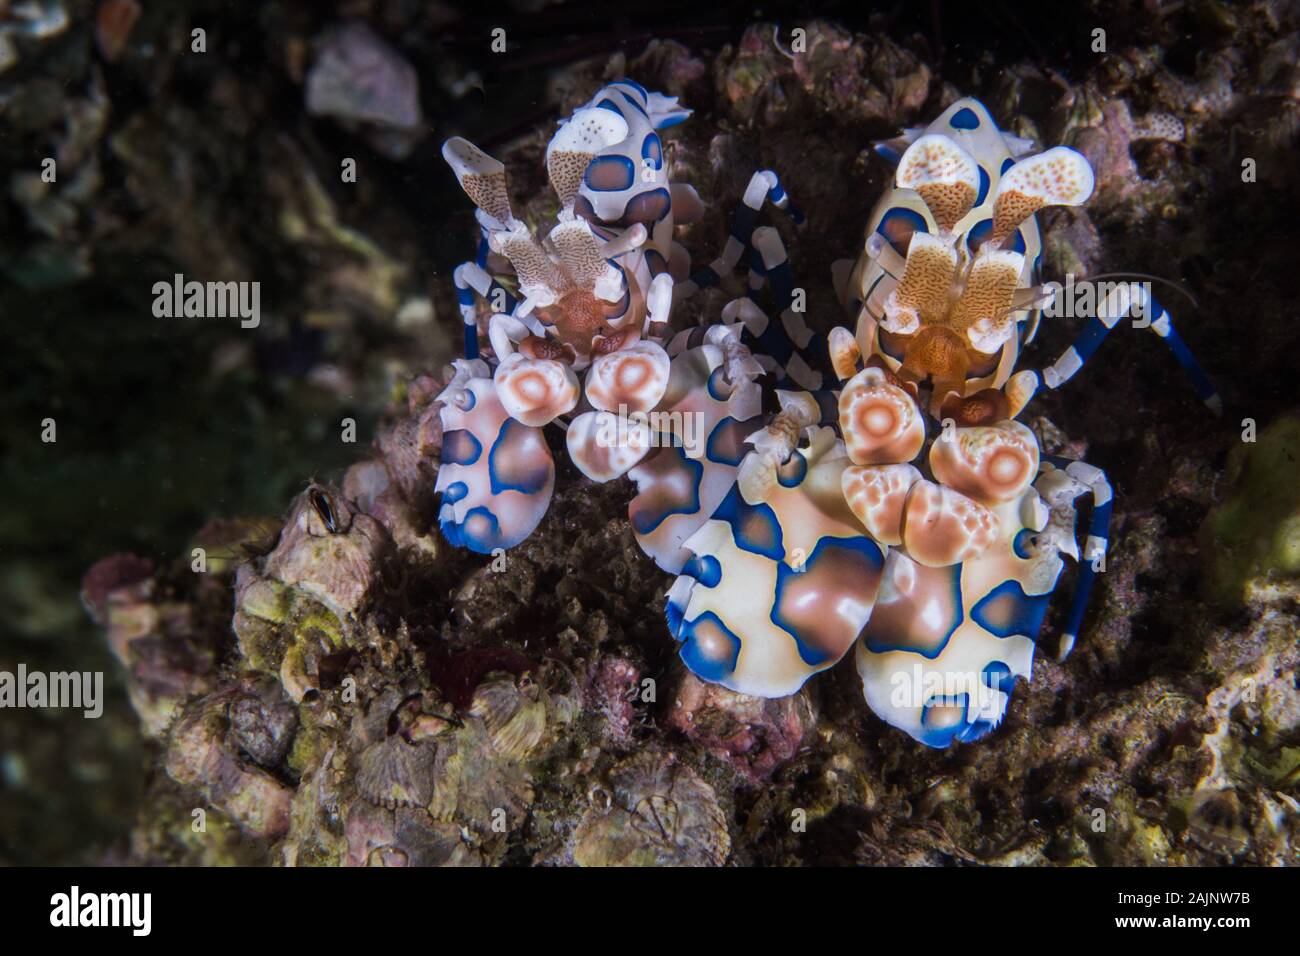 Two Harlequin shrimps (Hymenocera picta) close up of this tiny patterned brightly colored crustaceans. Stock Photo